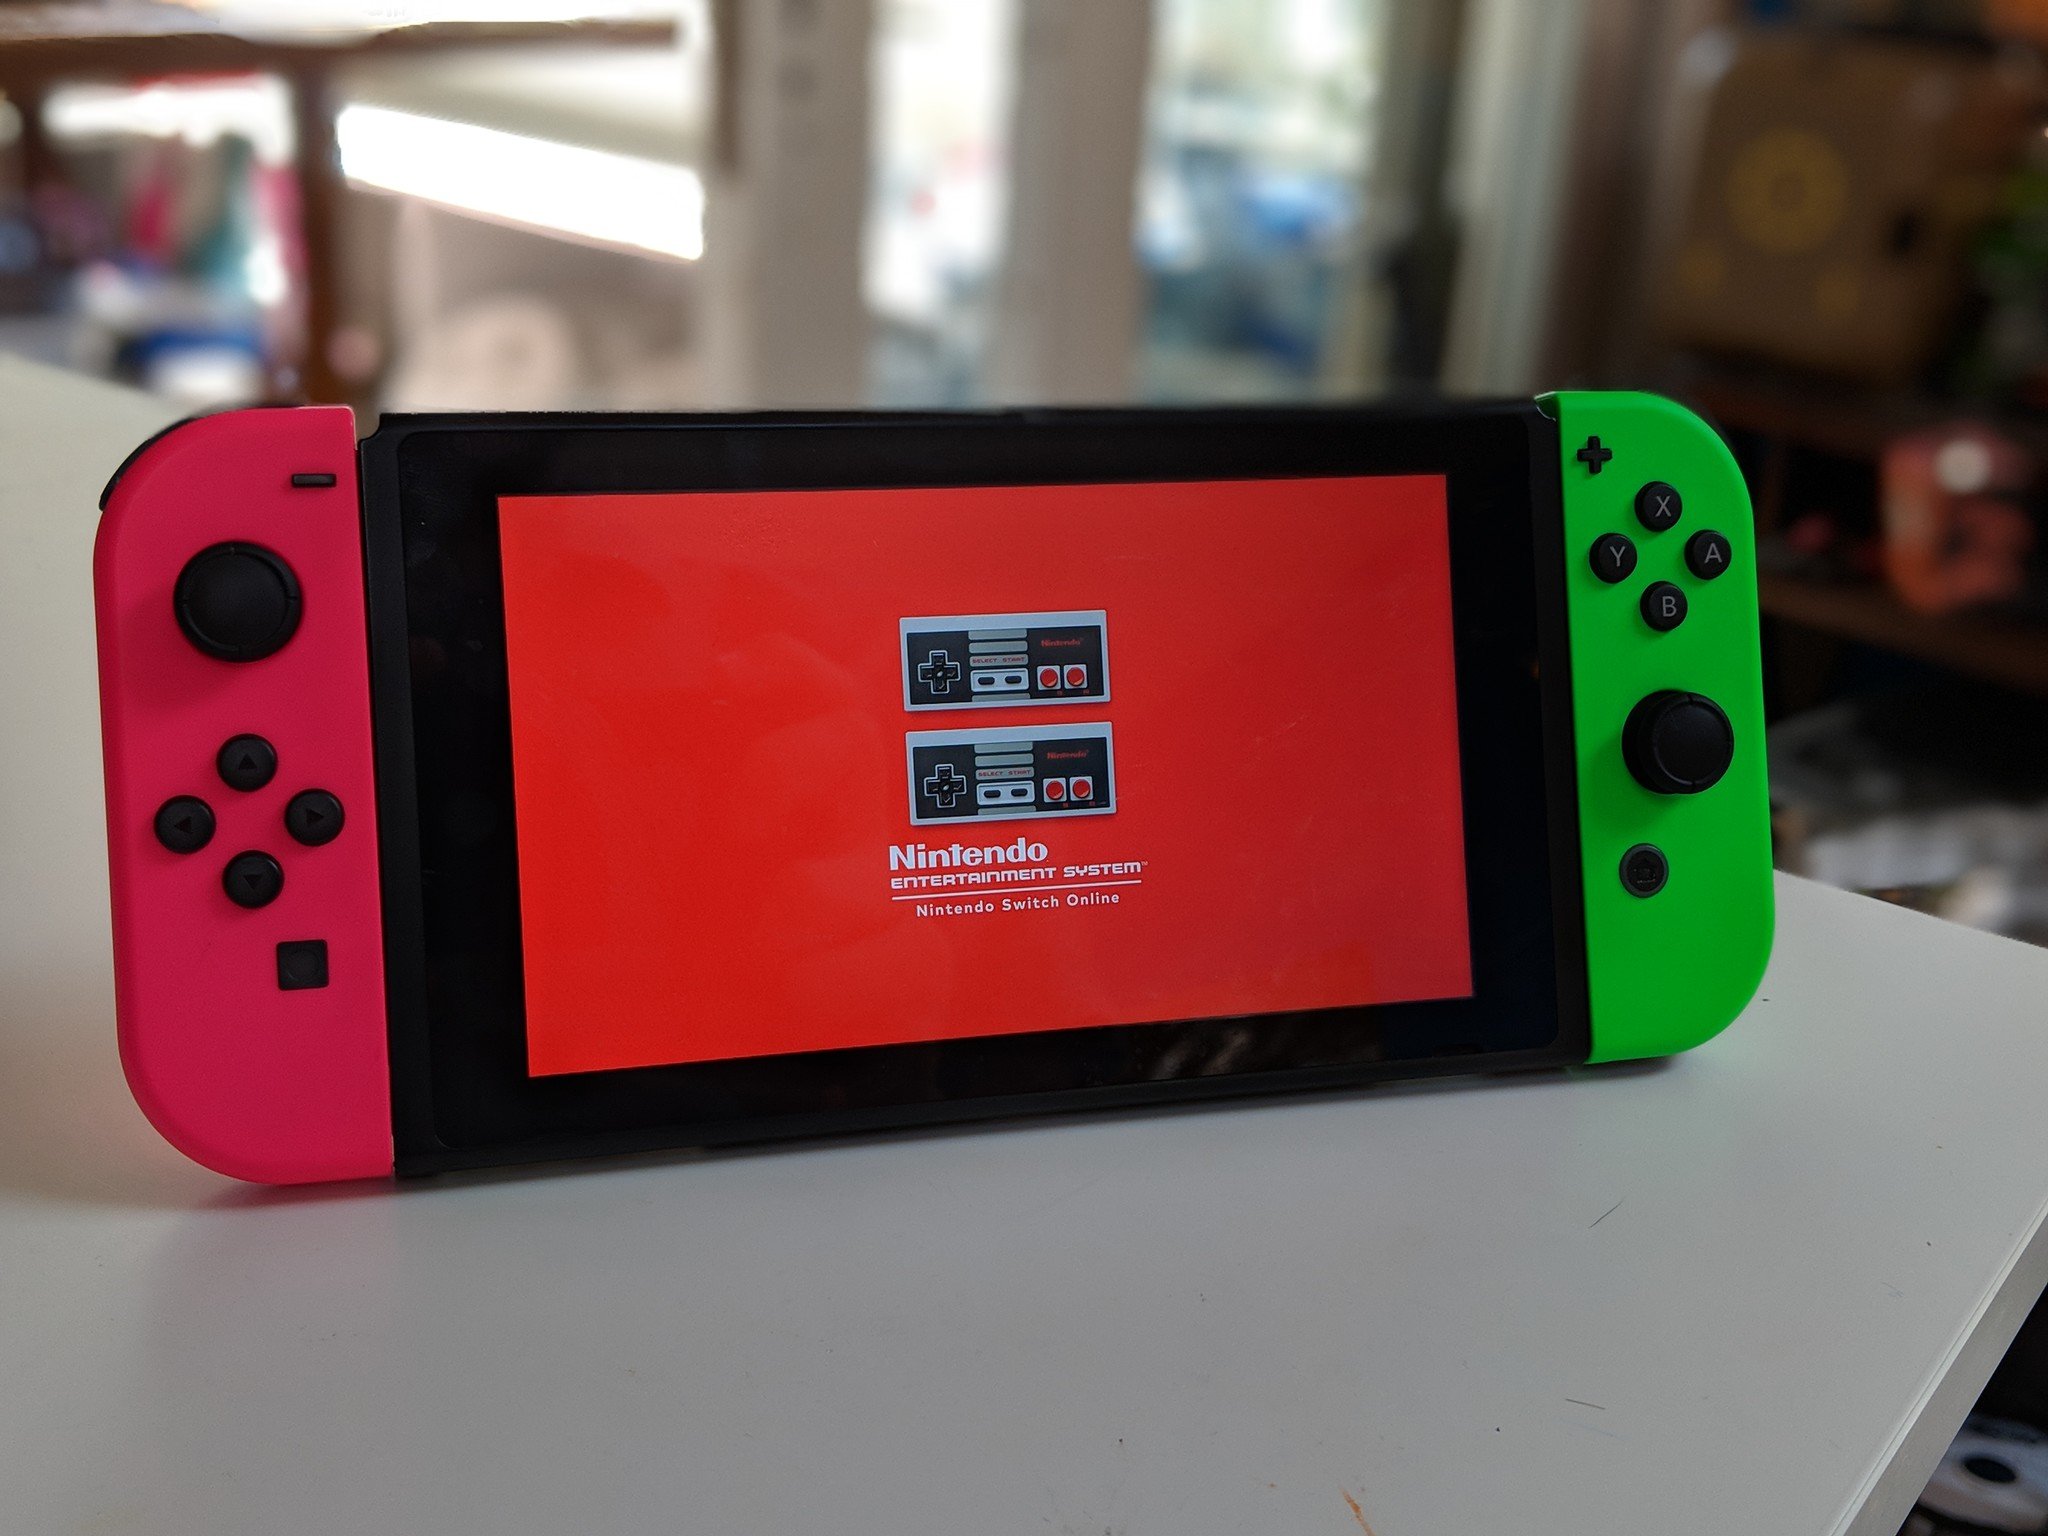 Nintendo Switch Online costs $20 per year and comes with 20 online